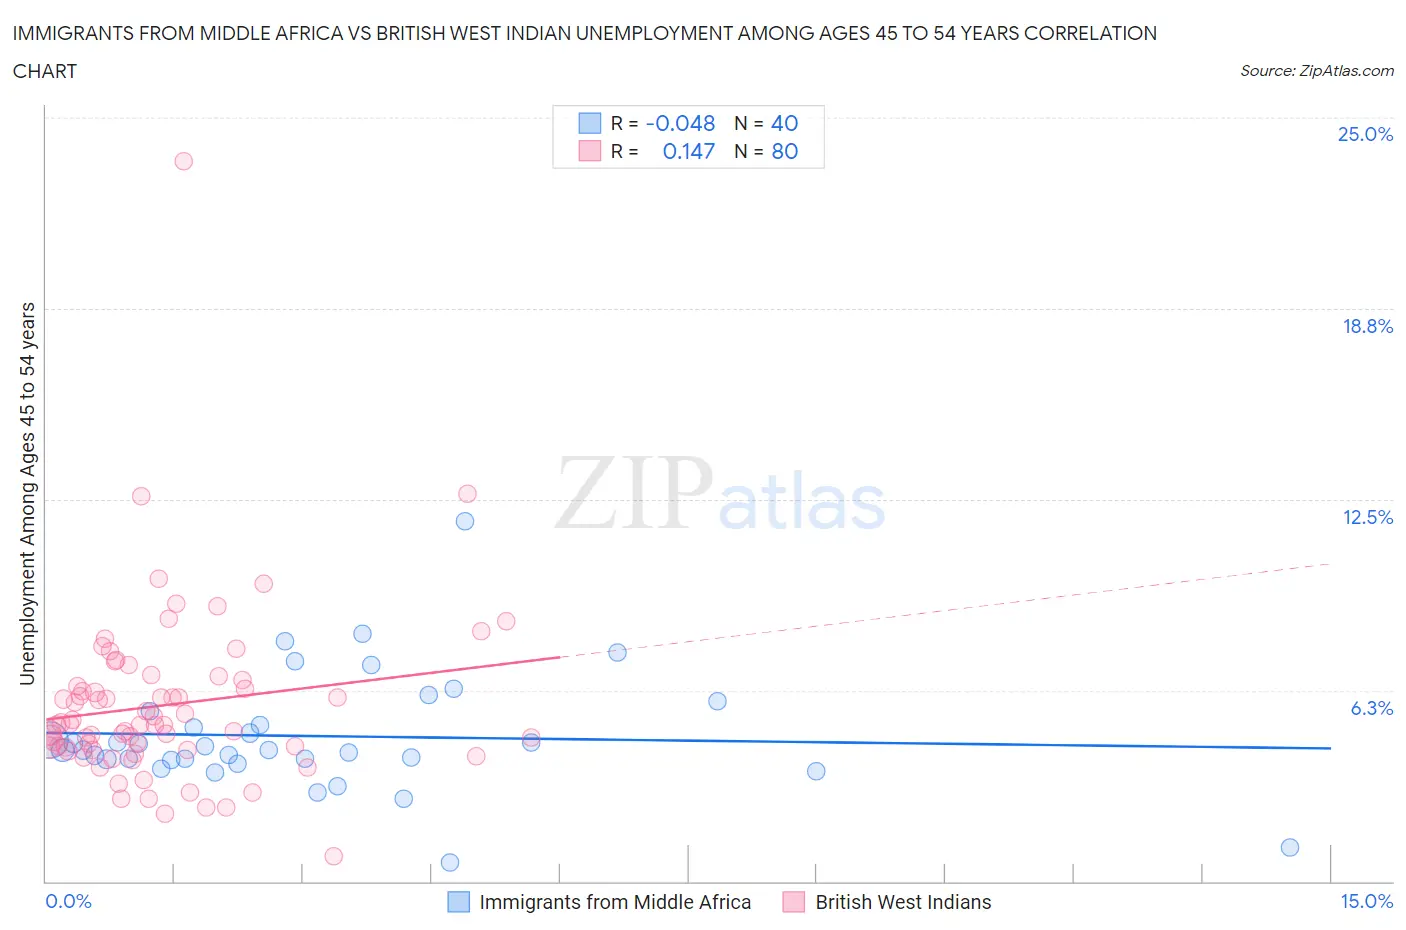 Immigrants from Middle Africa vs British West Indian Unemployment Among Ages 45 to 54 years